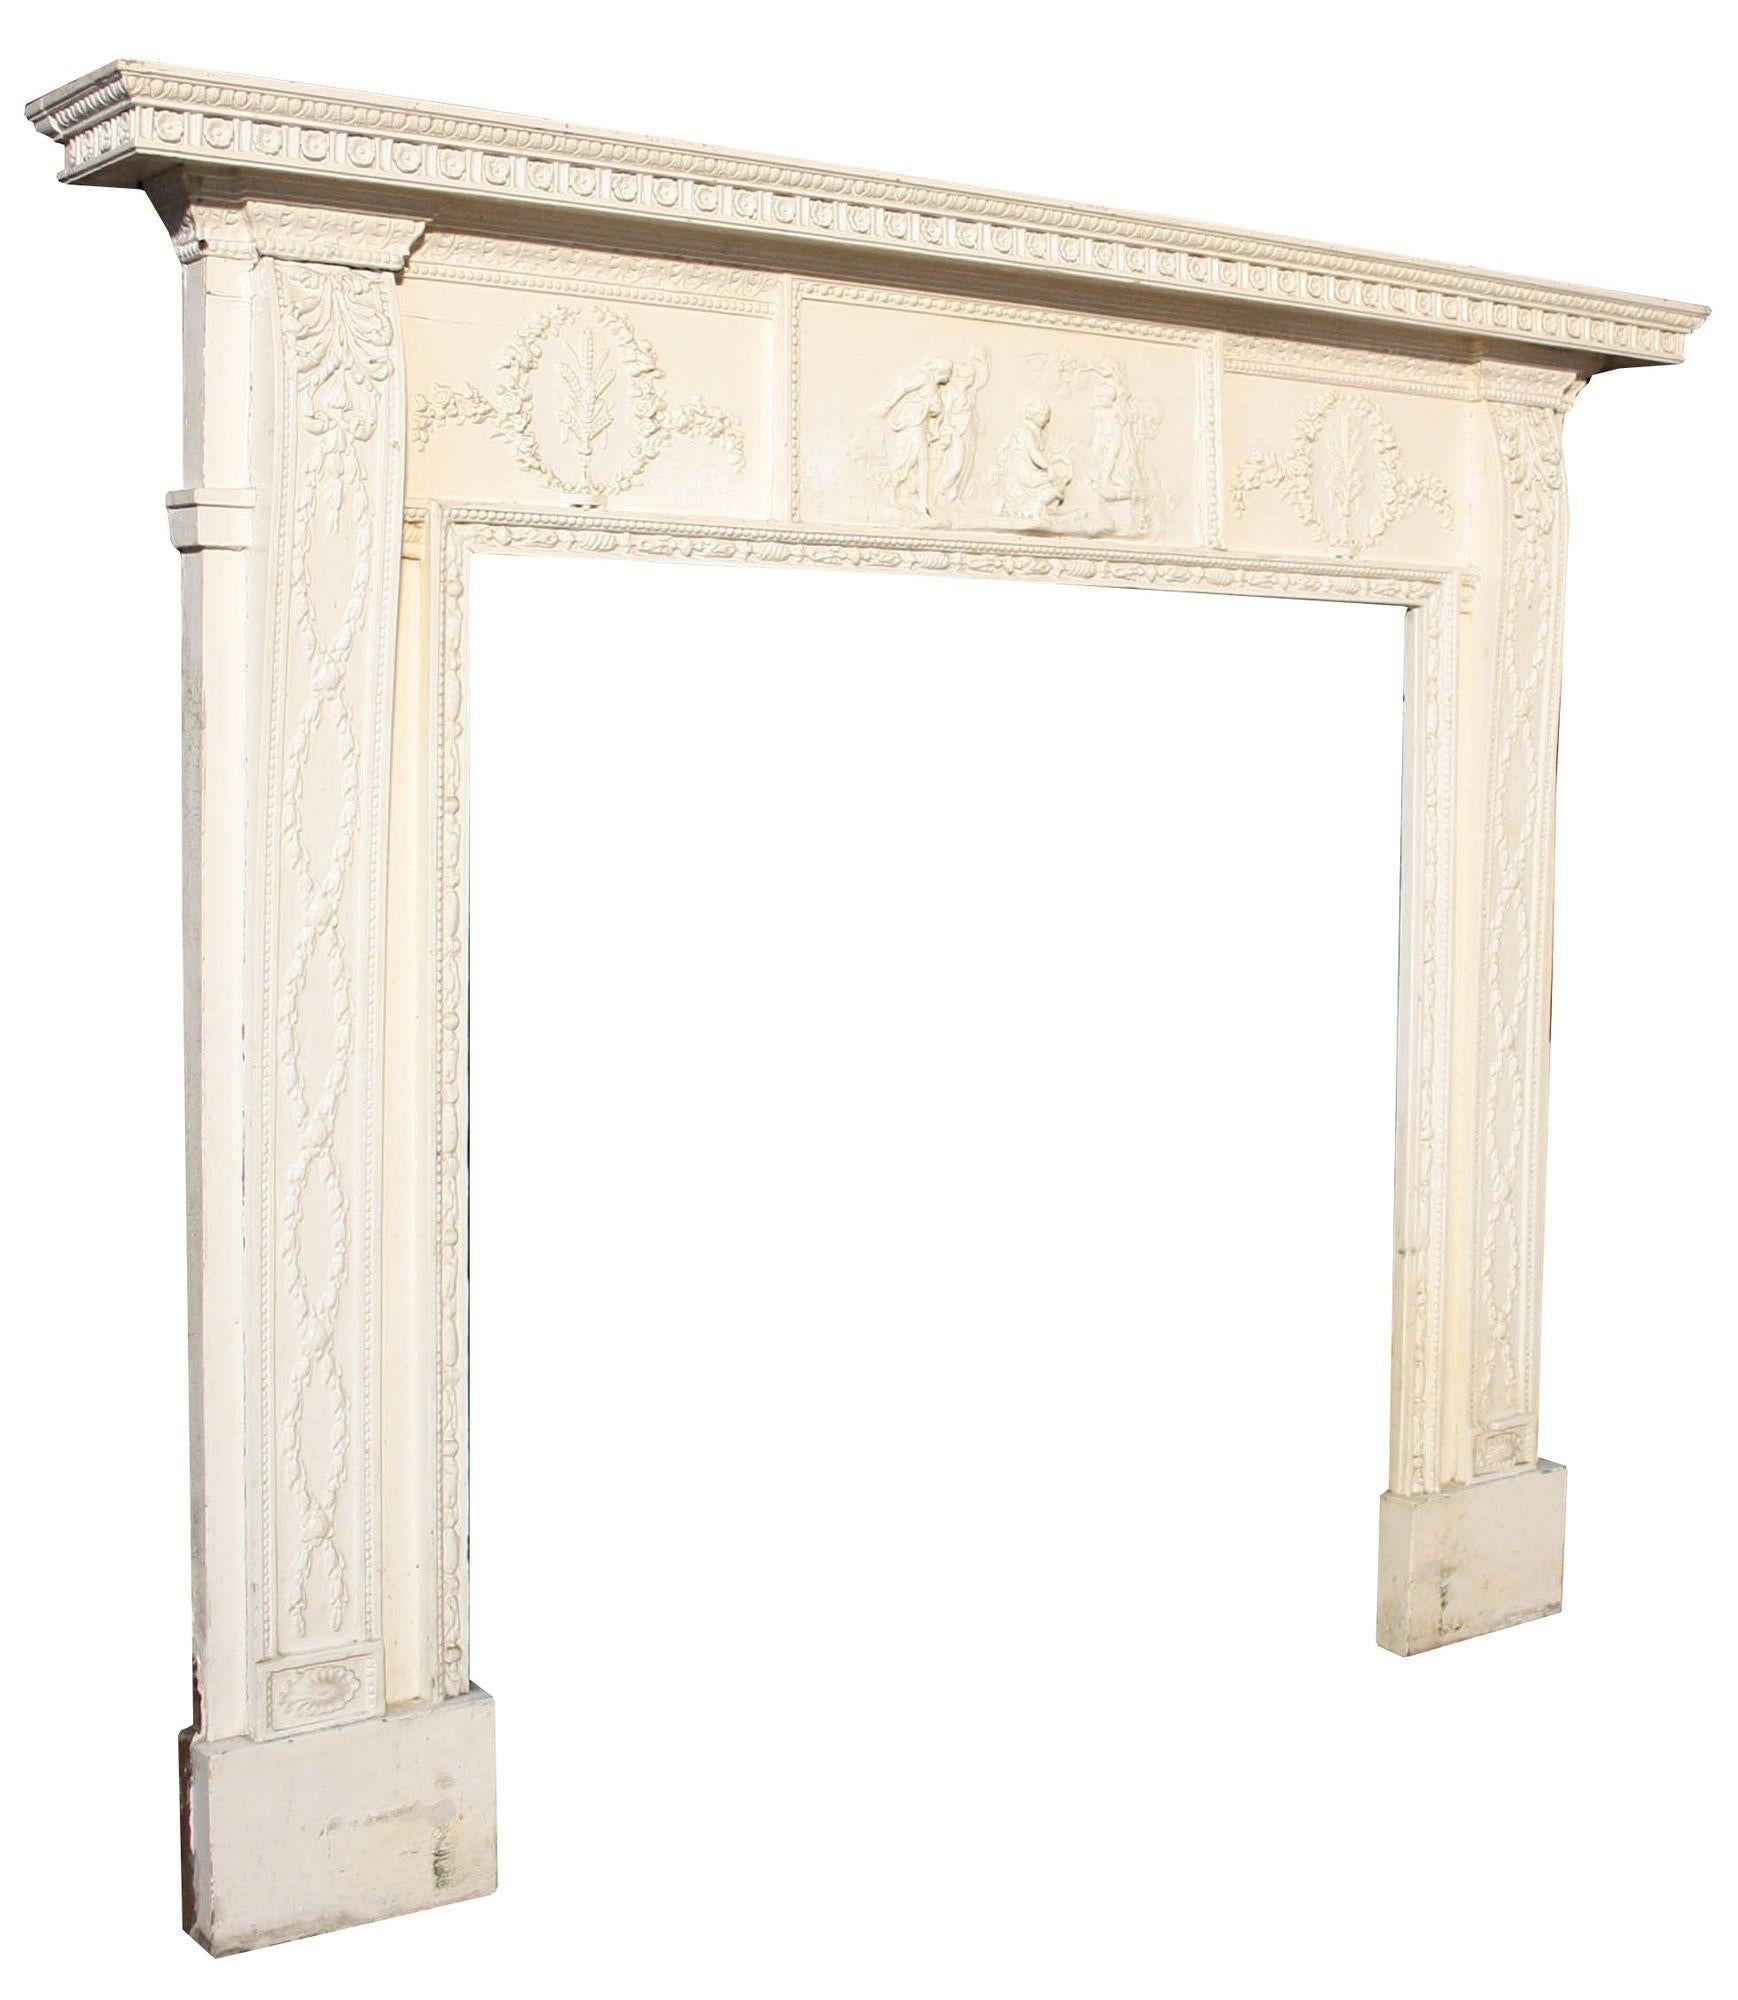 An antique English Regency style fire mantel salvaged from a property in Yorkshire. This pine and composition fire surround is richly decorated. It has a simple yet elegant design to suit traditional and contemporary homes alike.
The tablet depicts